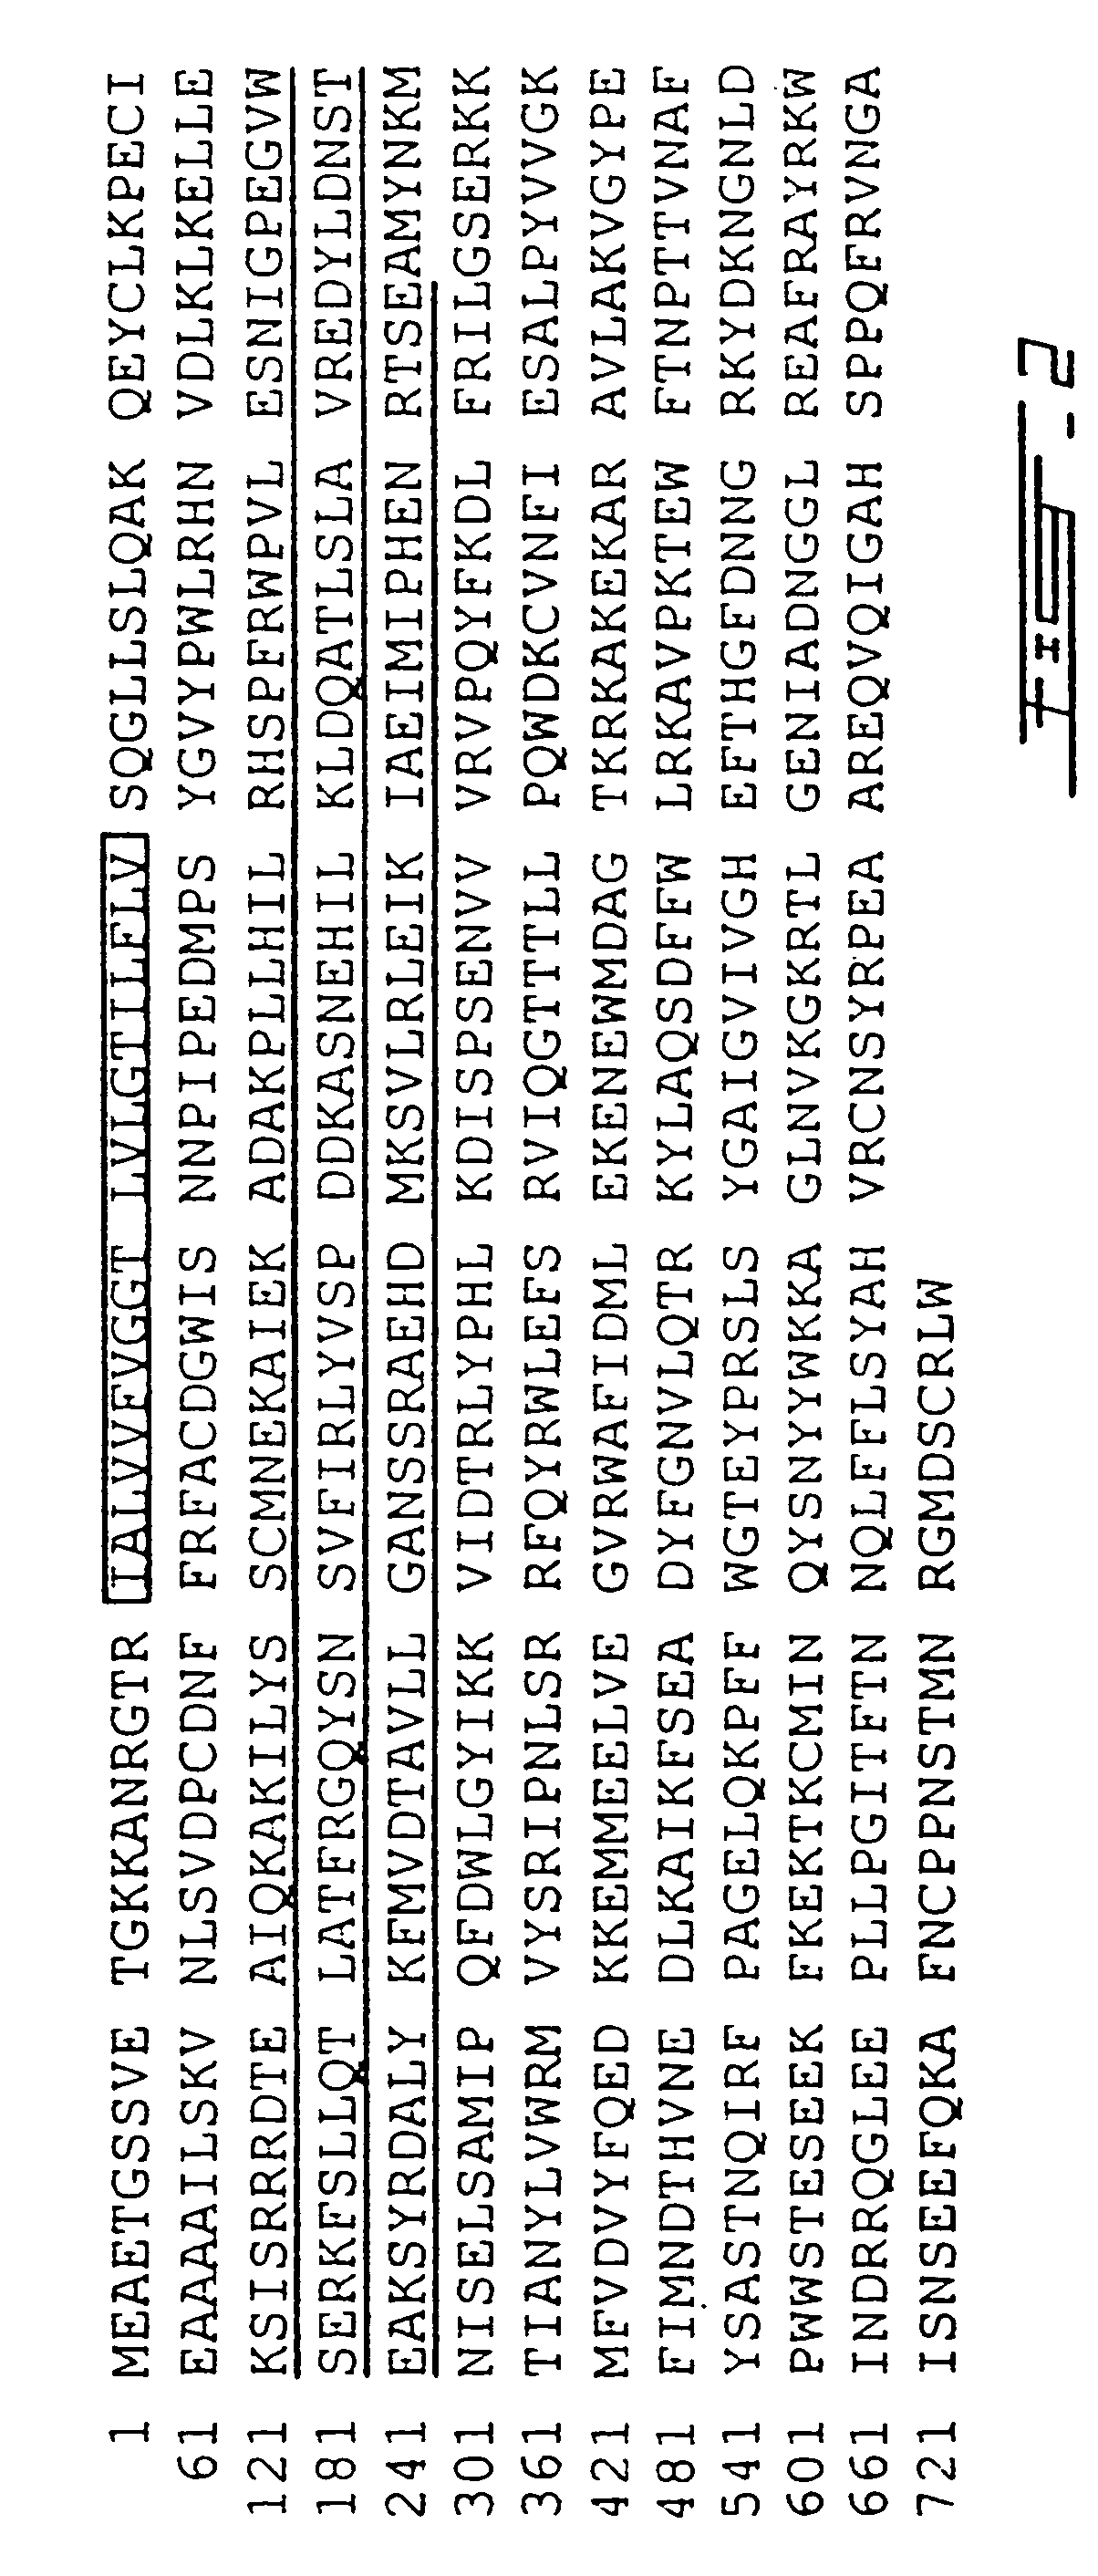 Composition, methods and reagents for the synthesis of a soluble form of human PHEX